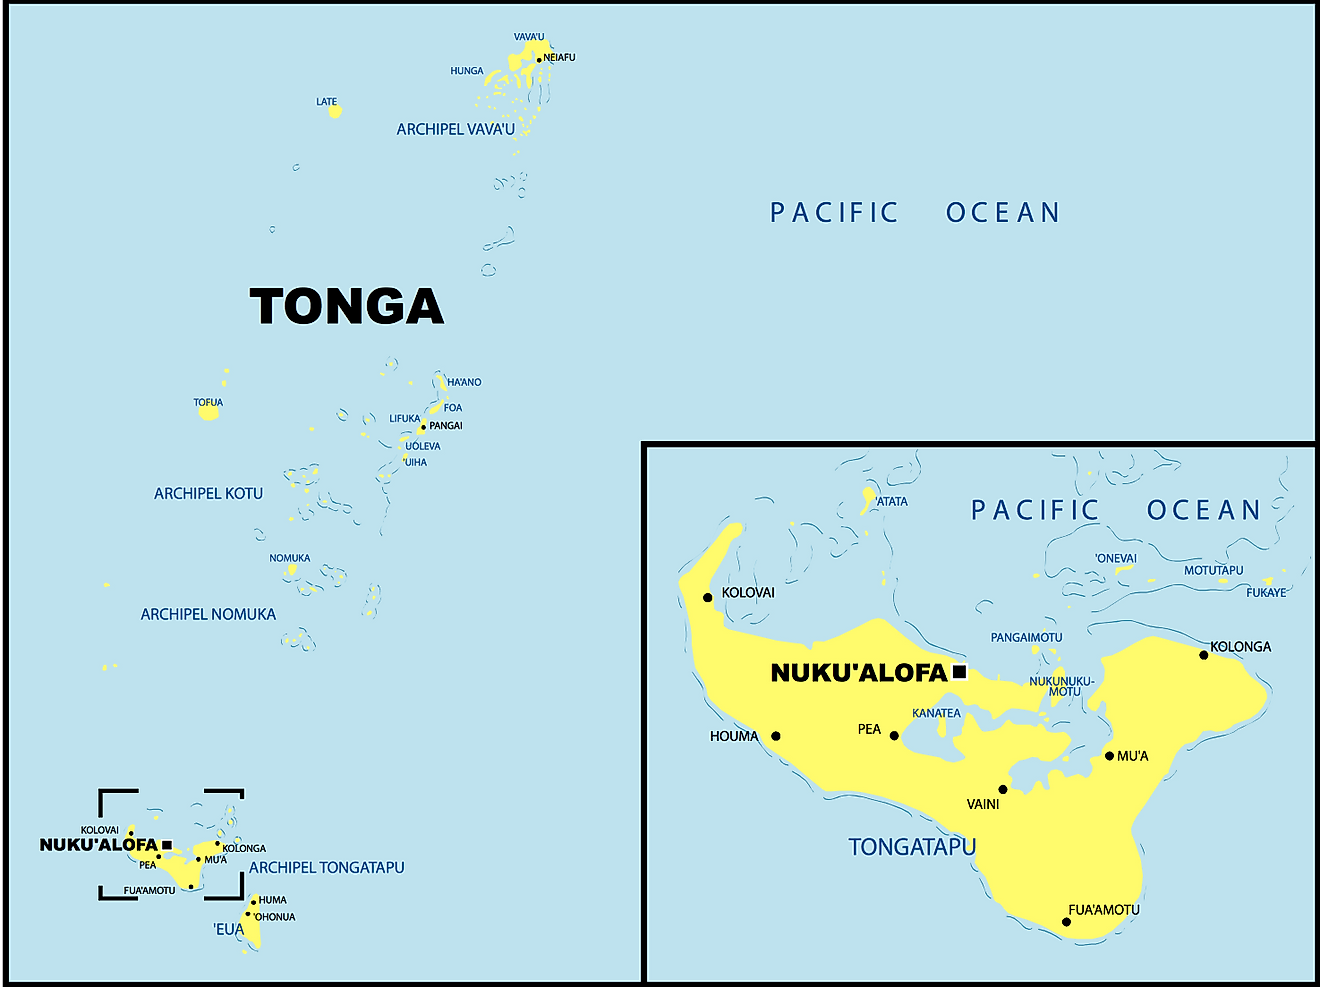 Political Map of Tonga showing its divisions and the capital city of Nukua'lofa